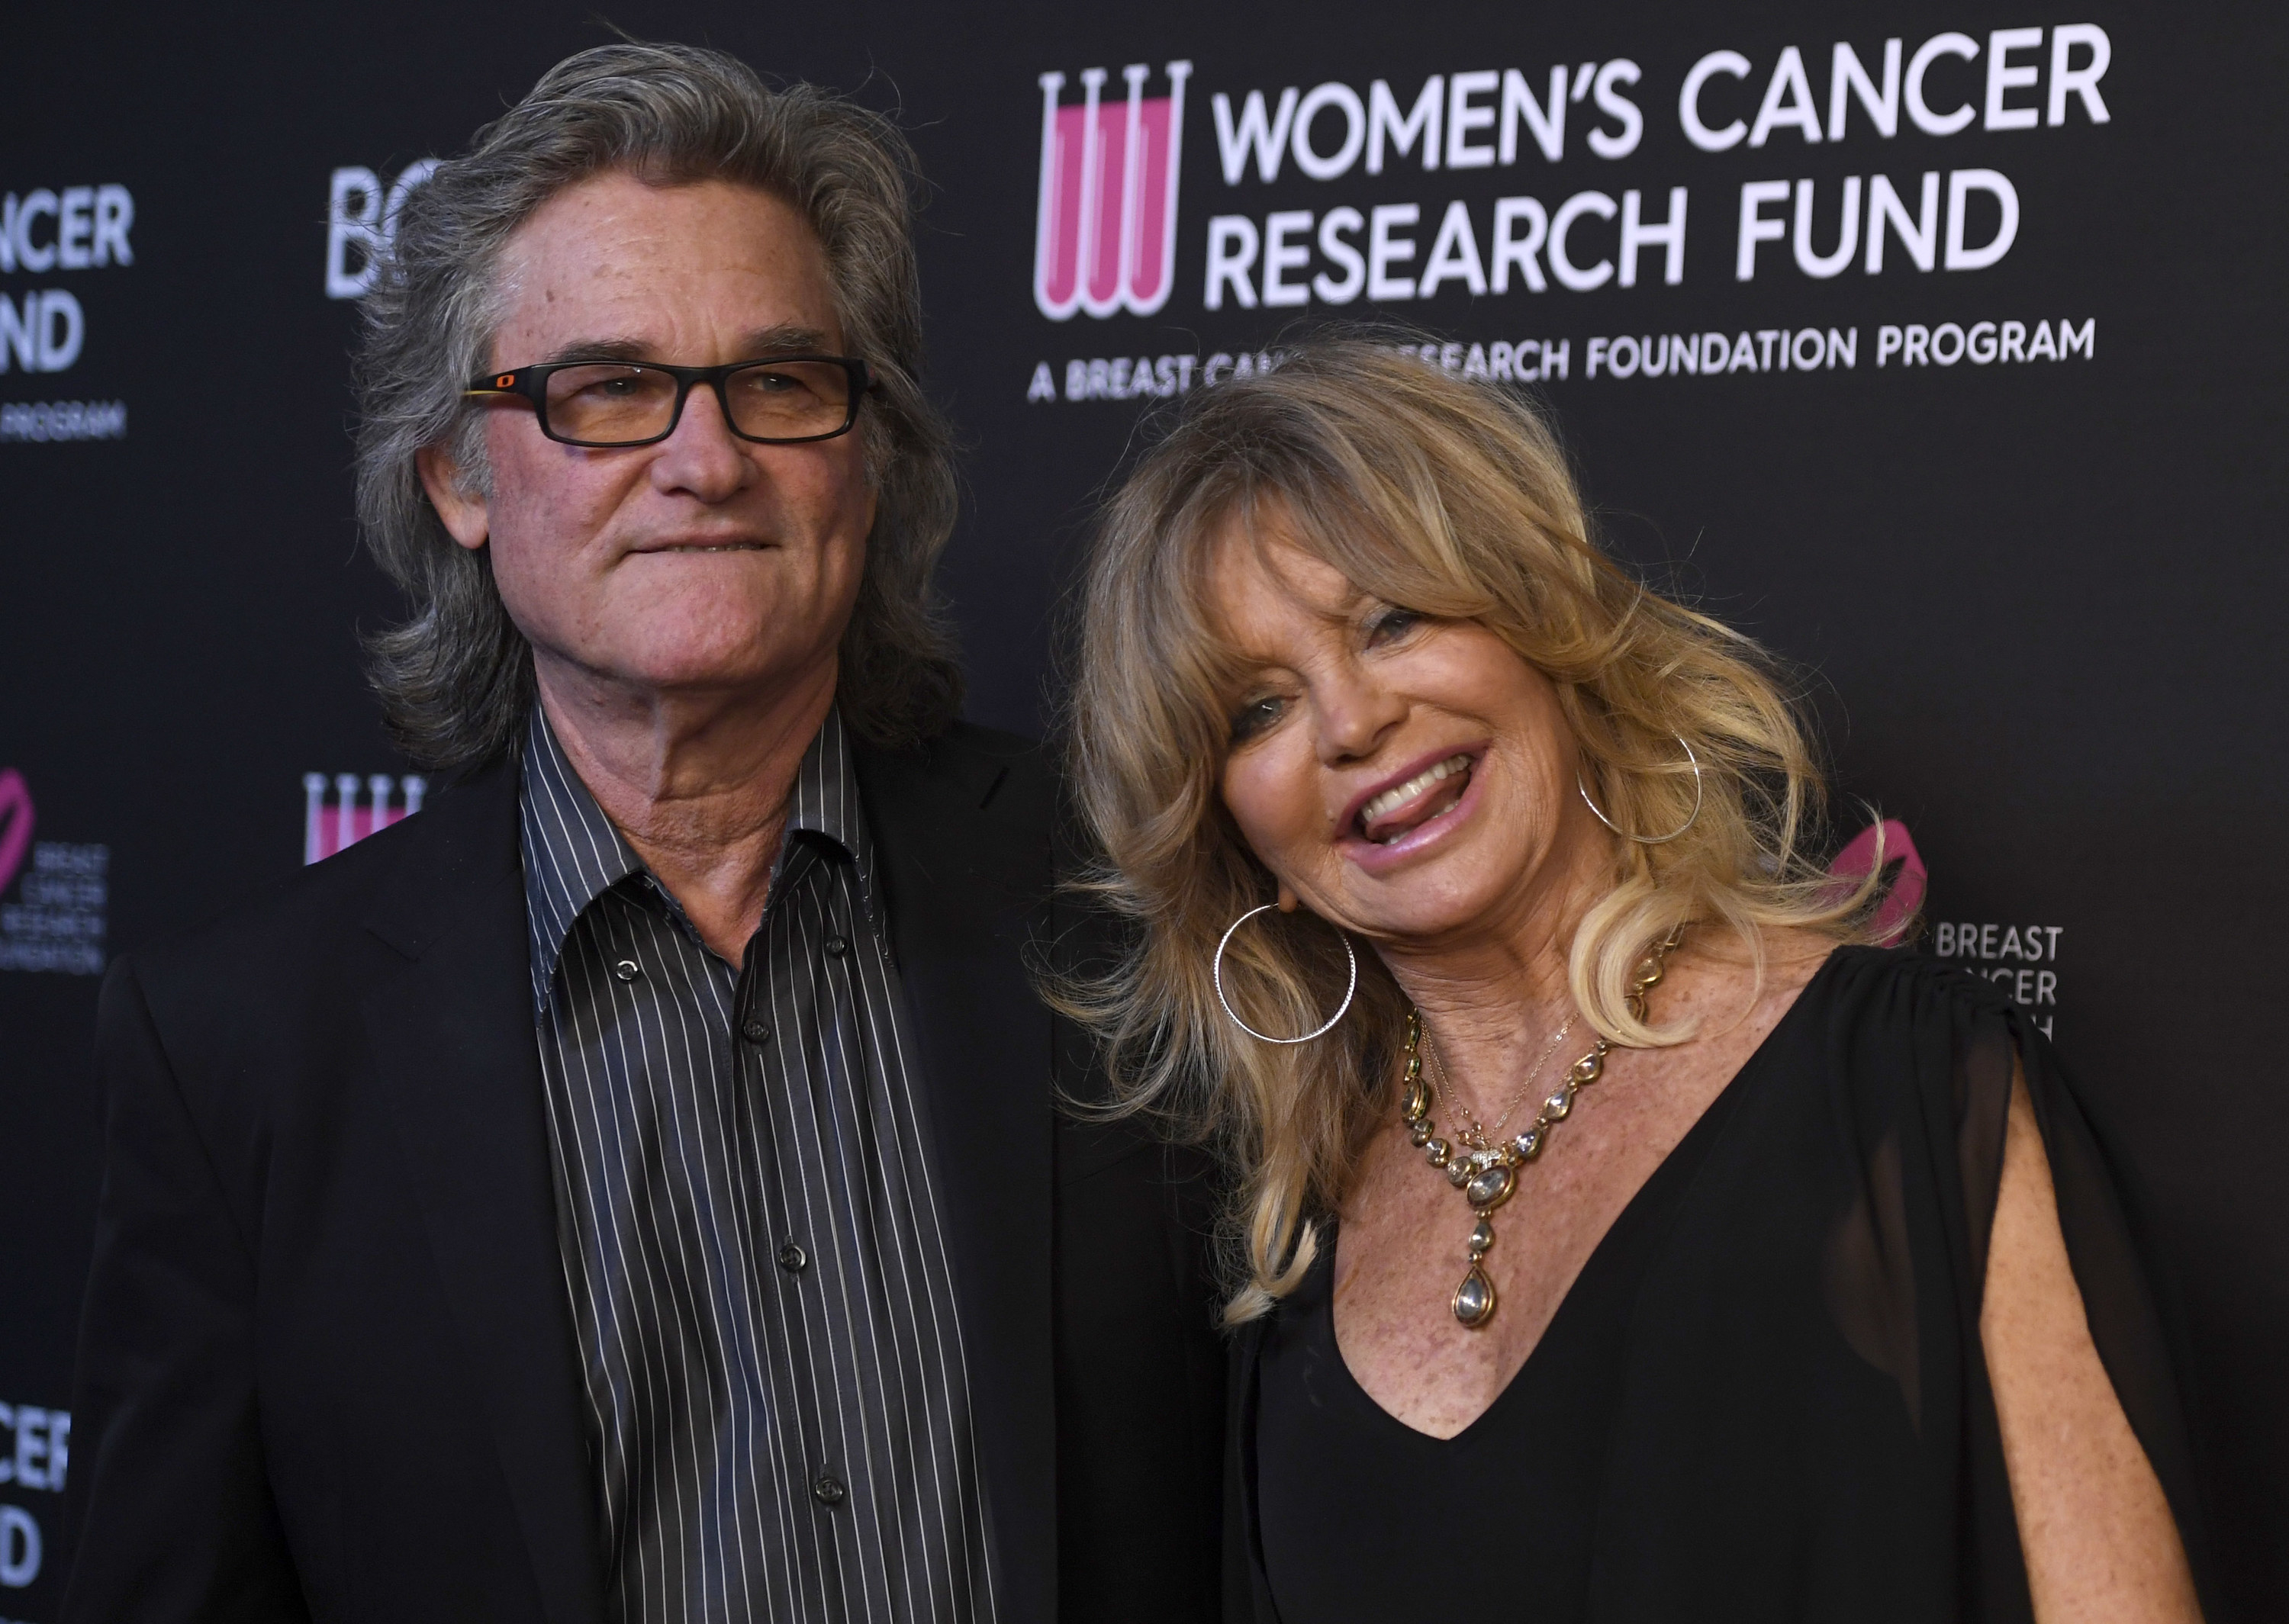 Kurt Russell and Goldie Hawn on the red carpet